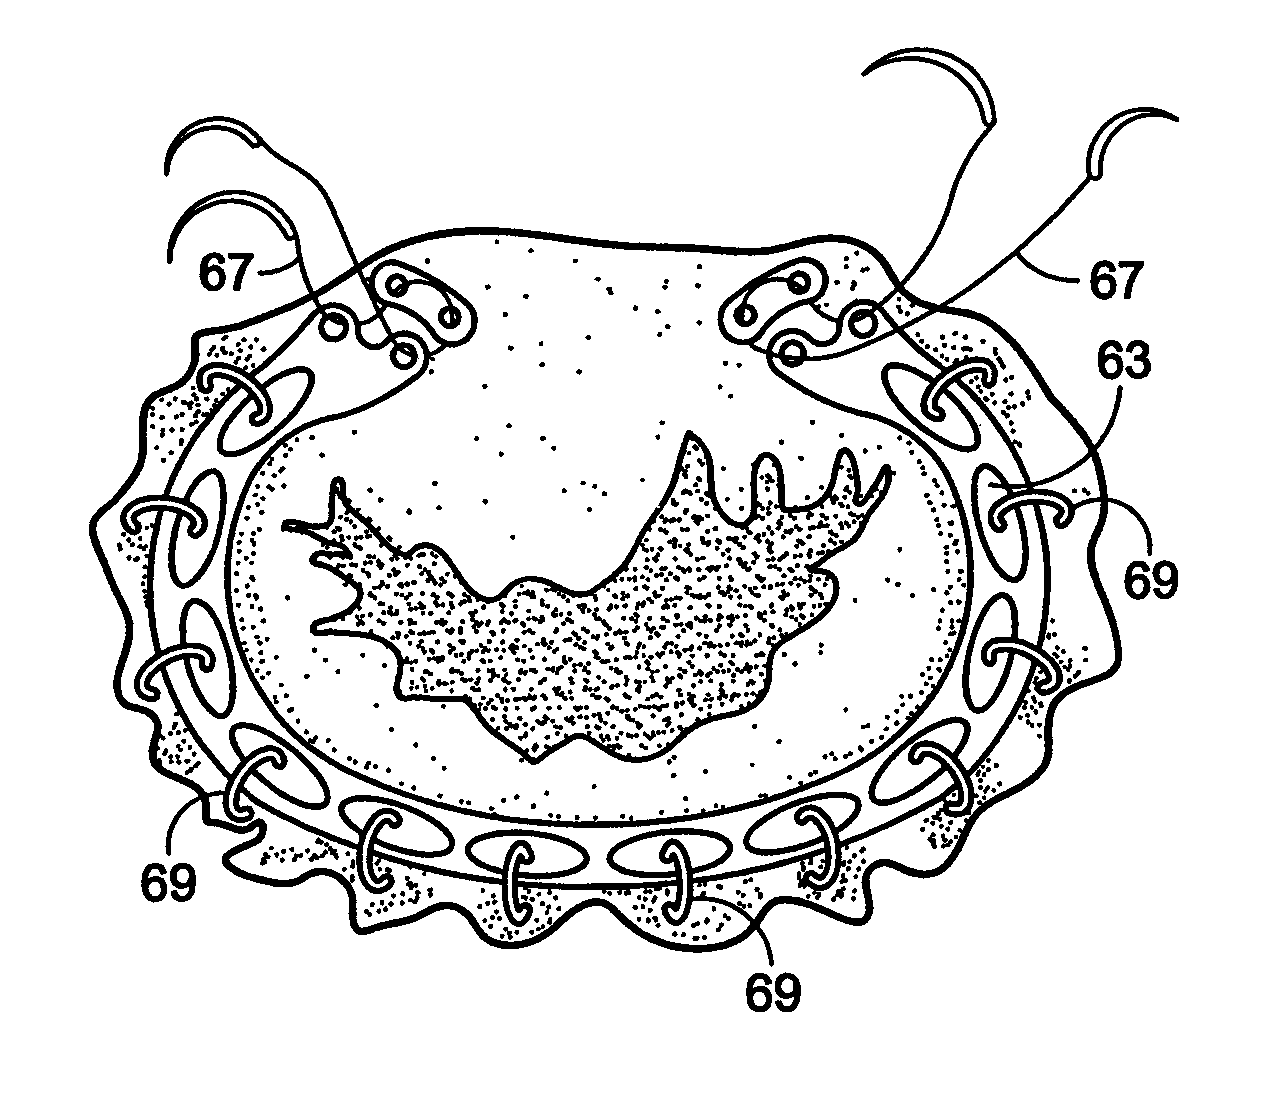 Implantation system for annuloplasty rings